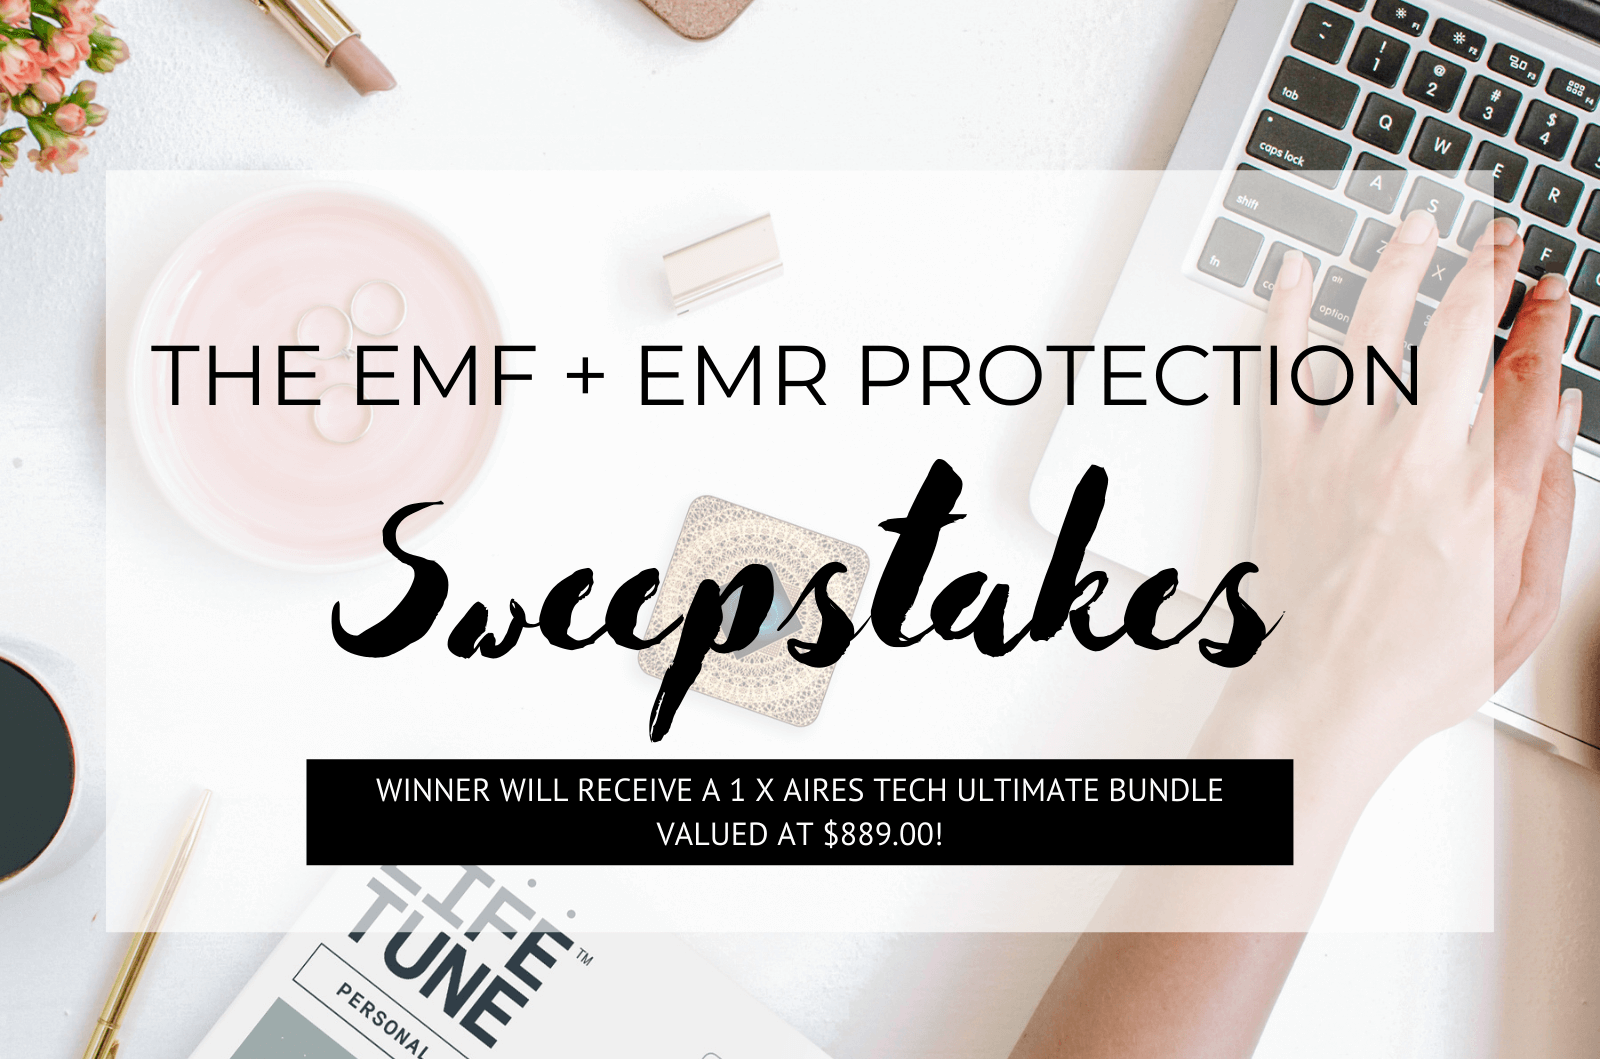 The Emf + Emr Protection Sweepstakes